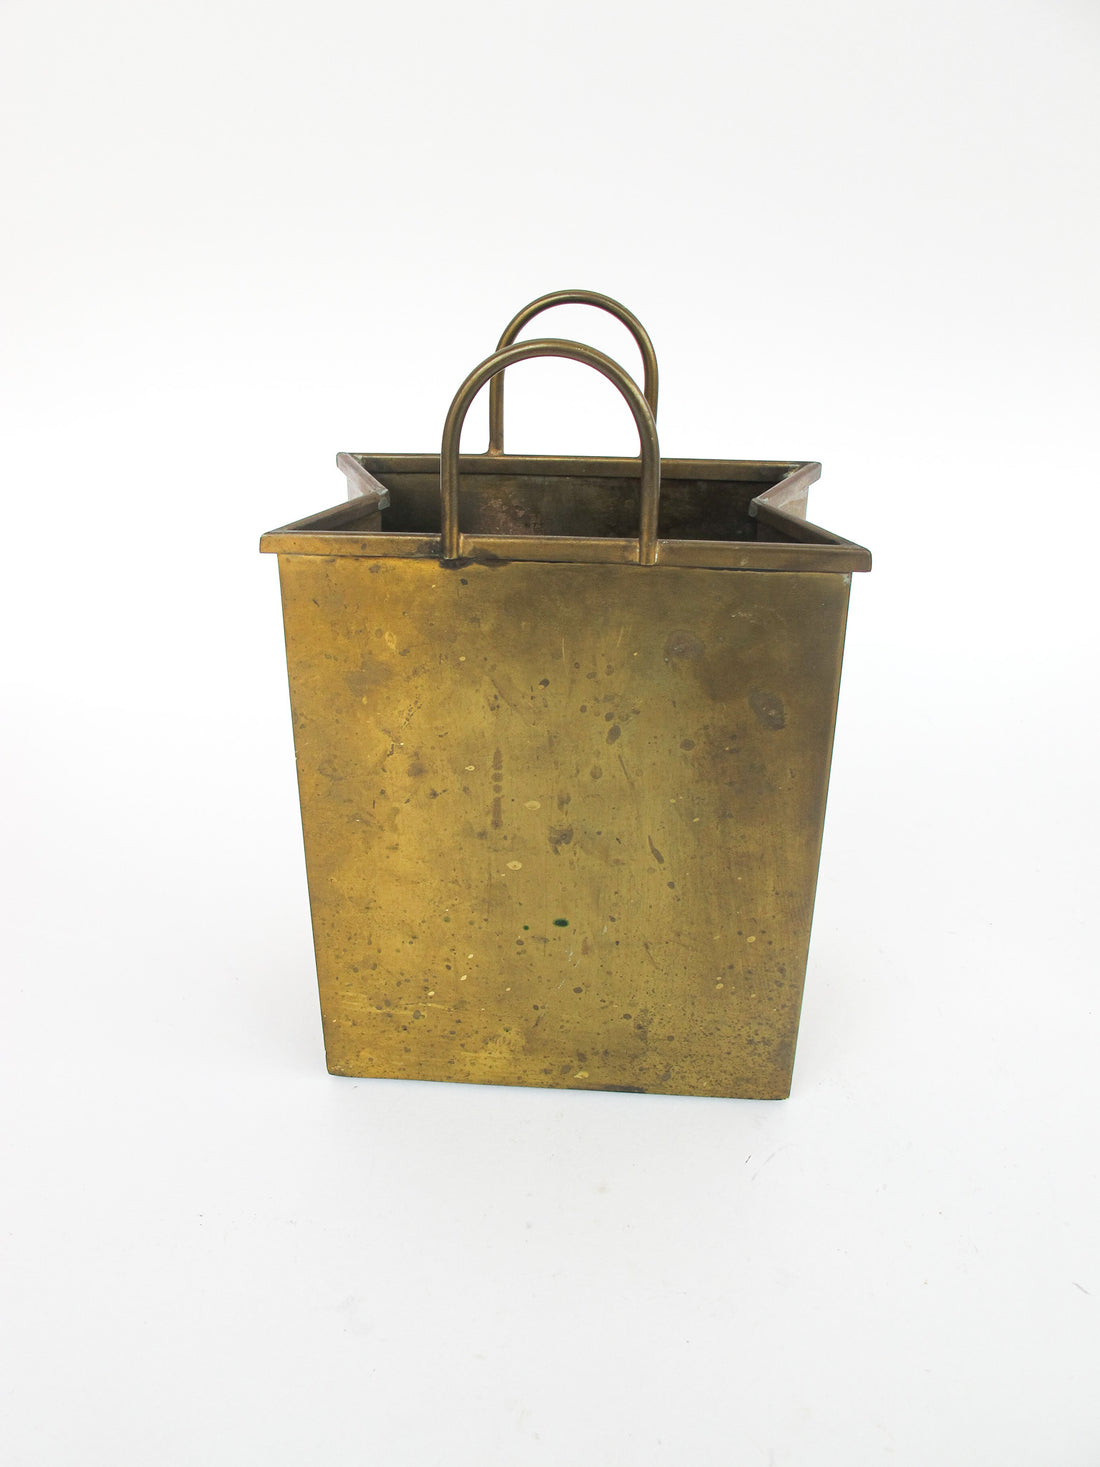 Gio Ponti Designer Brass Paper Shopping Bag Made in Italy Vintage